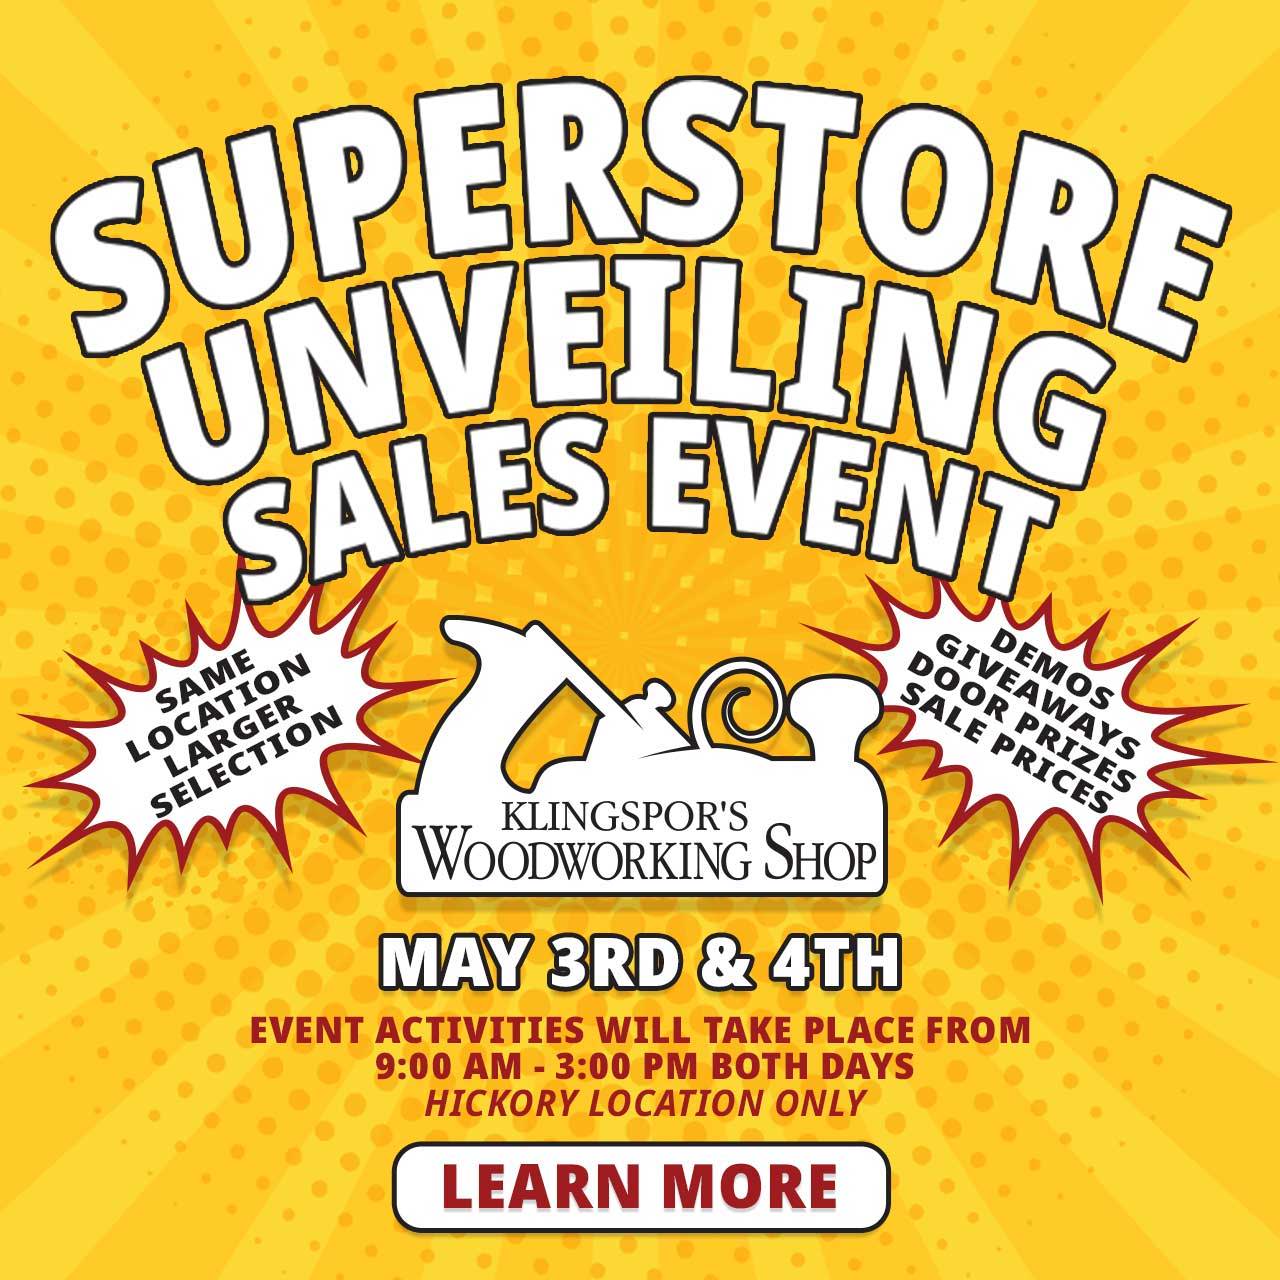 Hickory Super Store Unvieling Sales Event